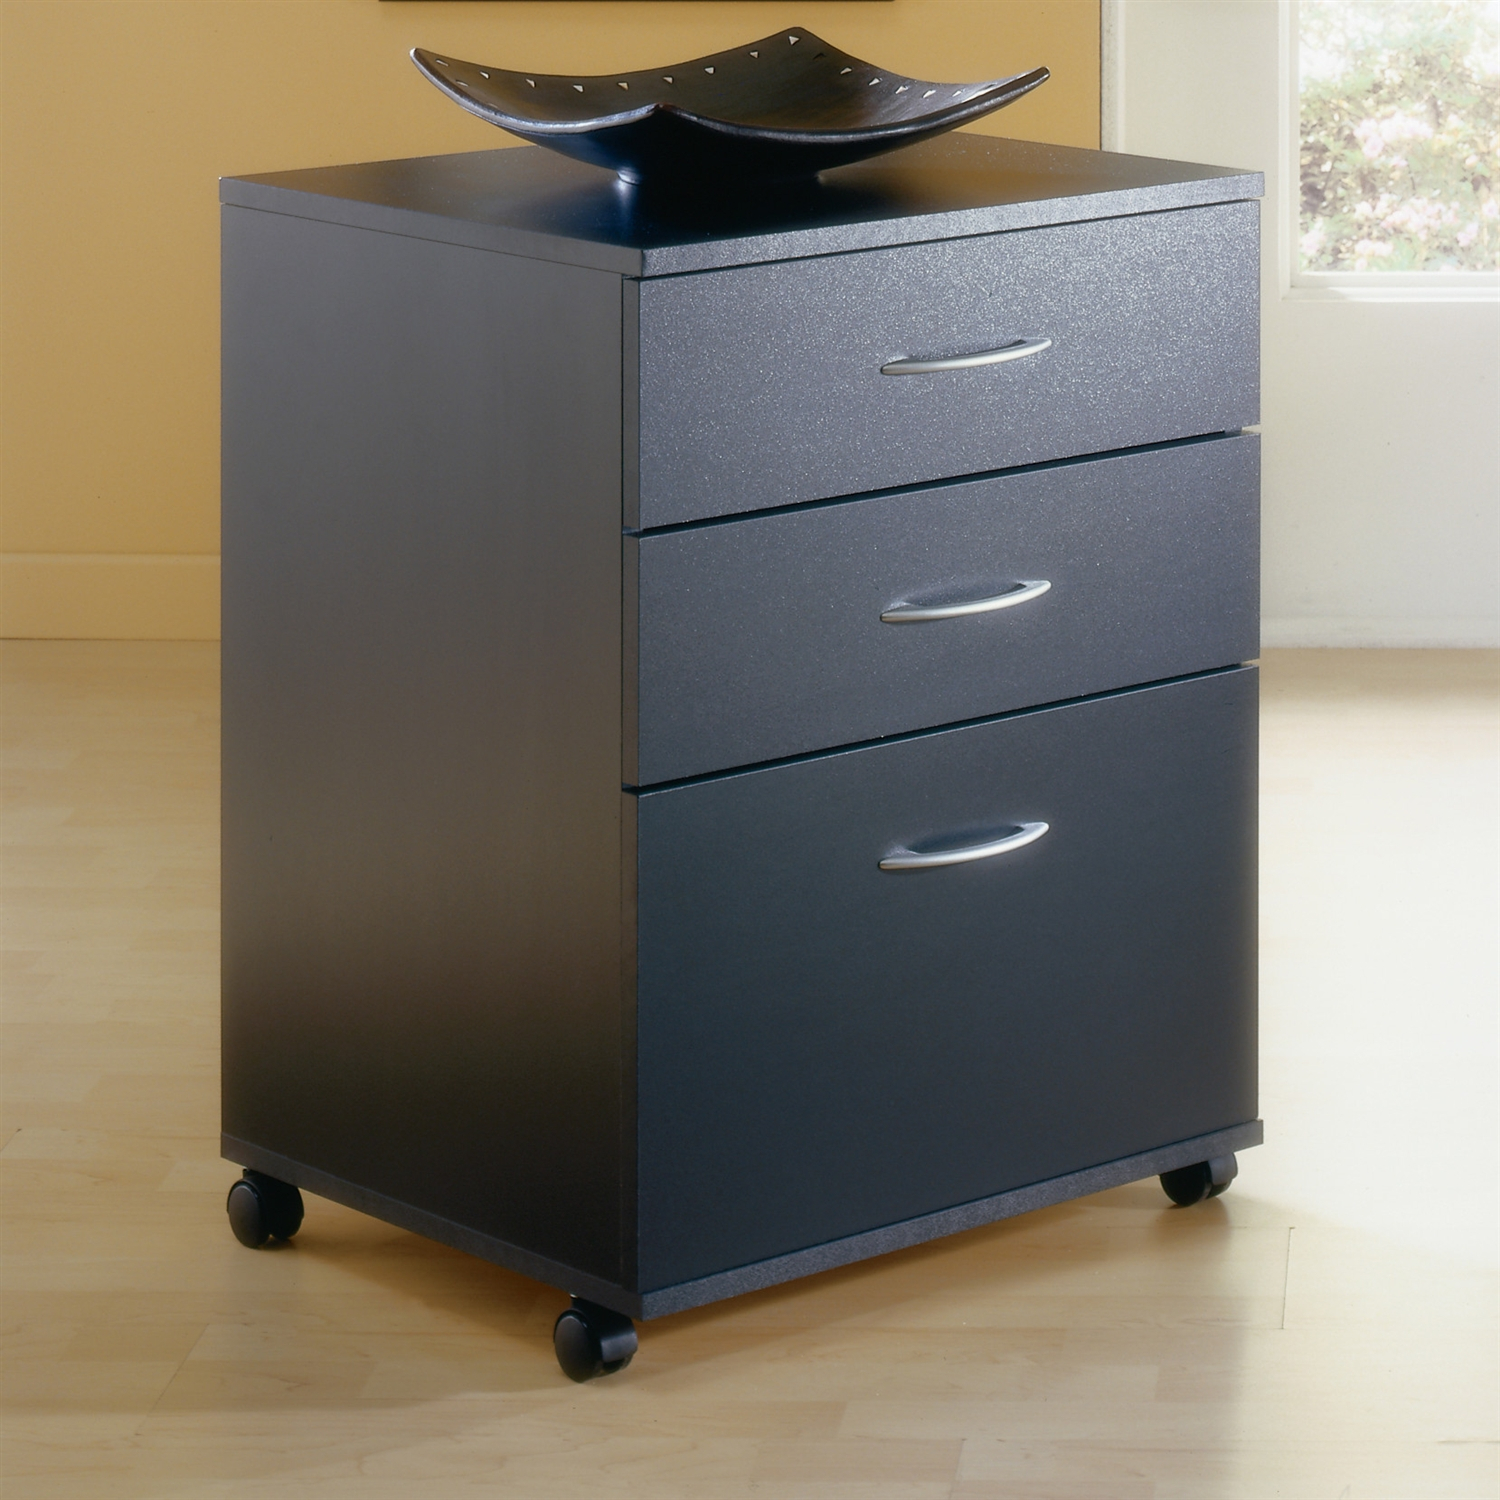 File Cabinets File Cabinet Casters File Cabinet Caddy Blue Caster pertaining to sizing 1500 X 1500